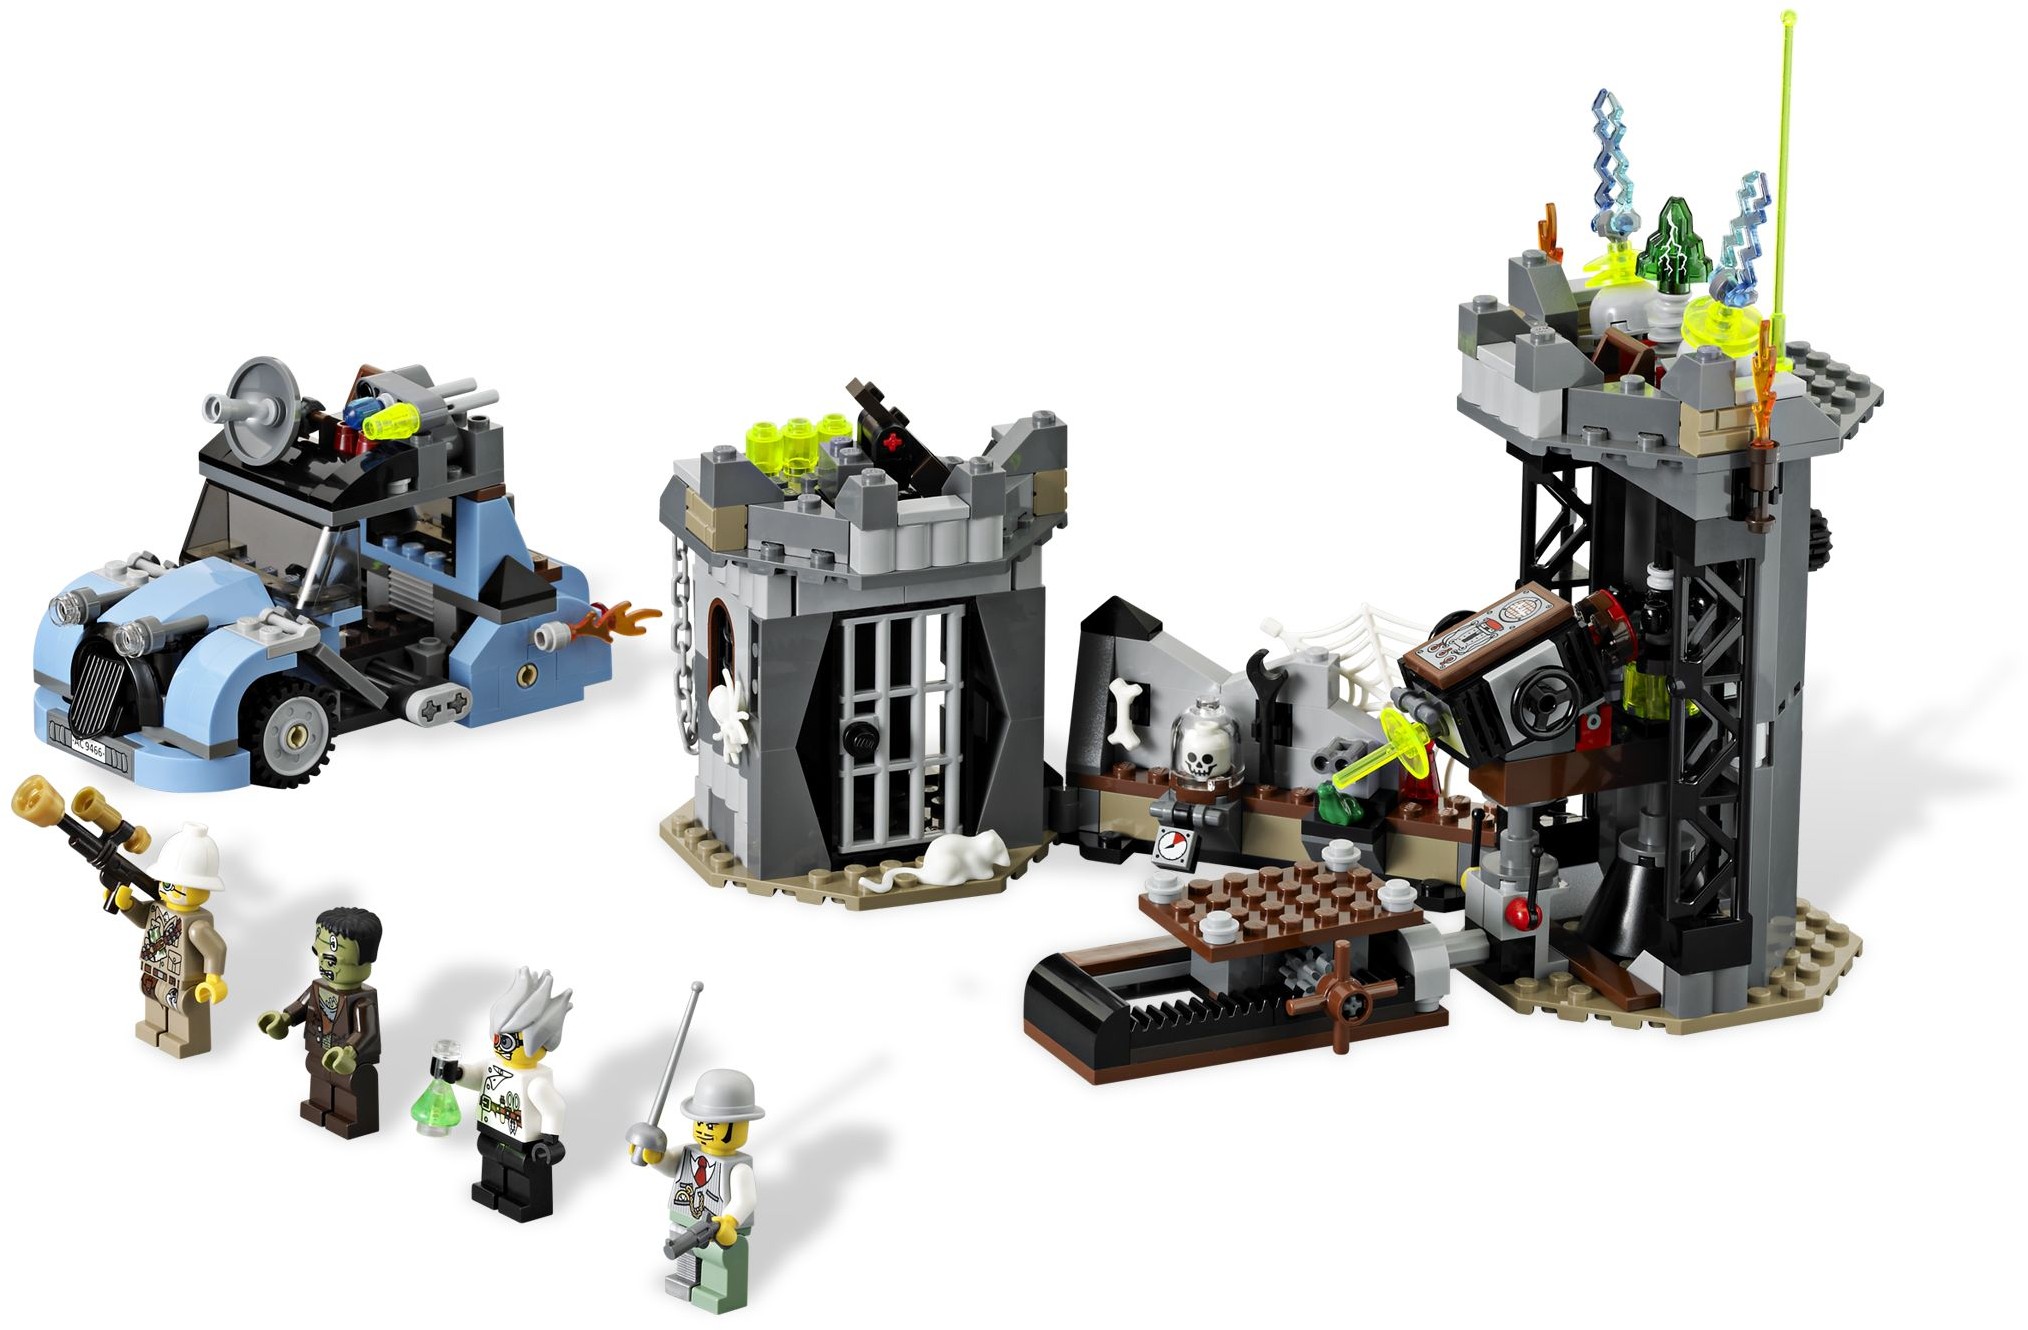 lego monster fighters all sets